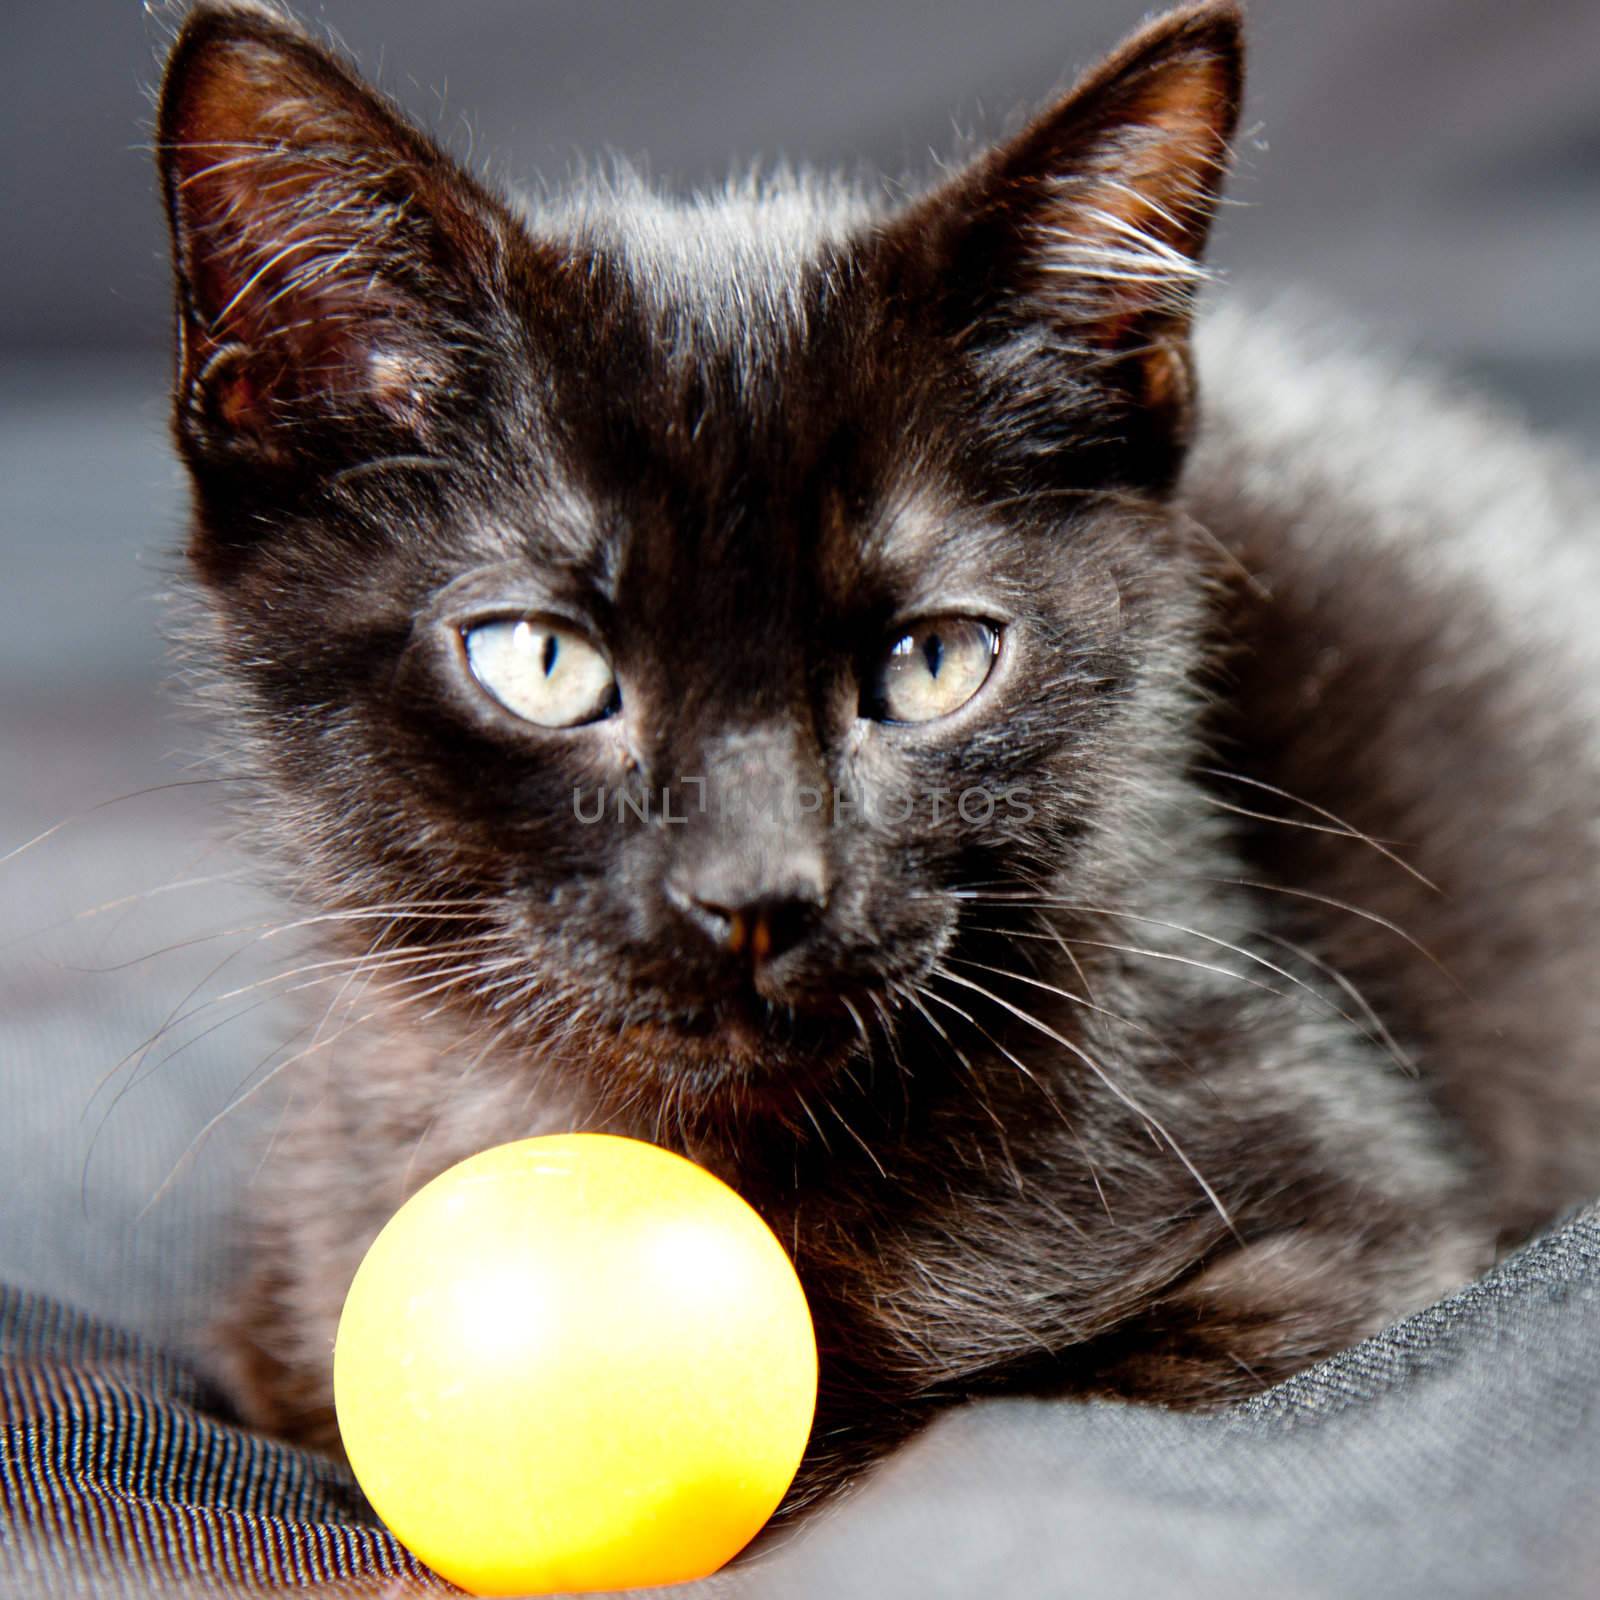 Kitten lying on a black blanket, next to a ball, head up